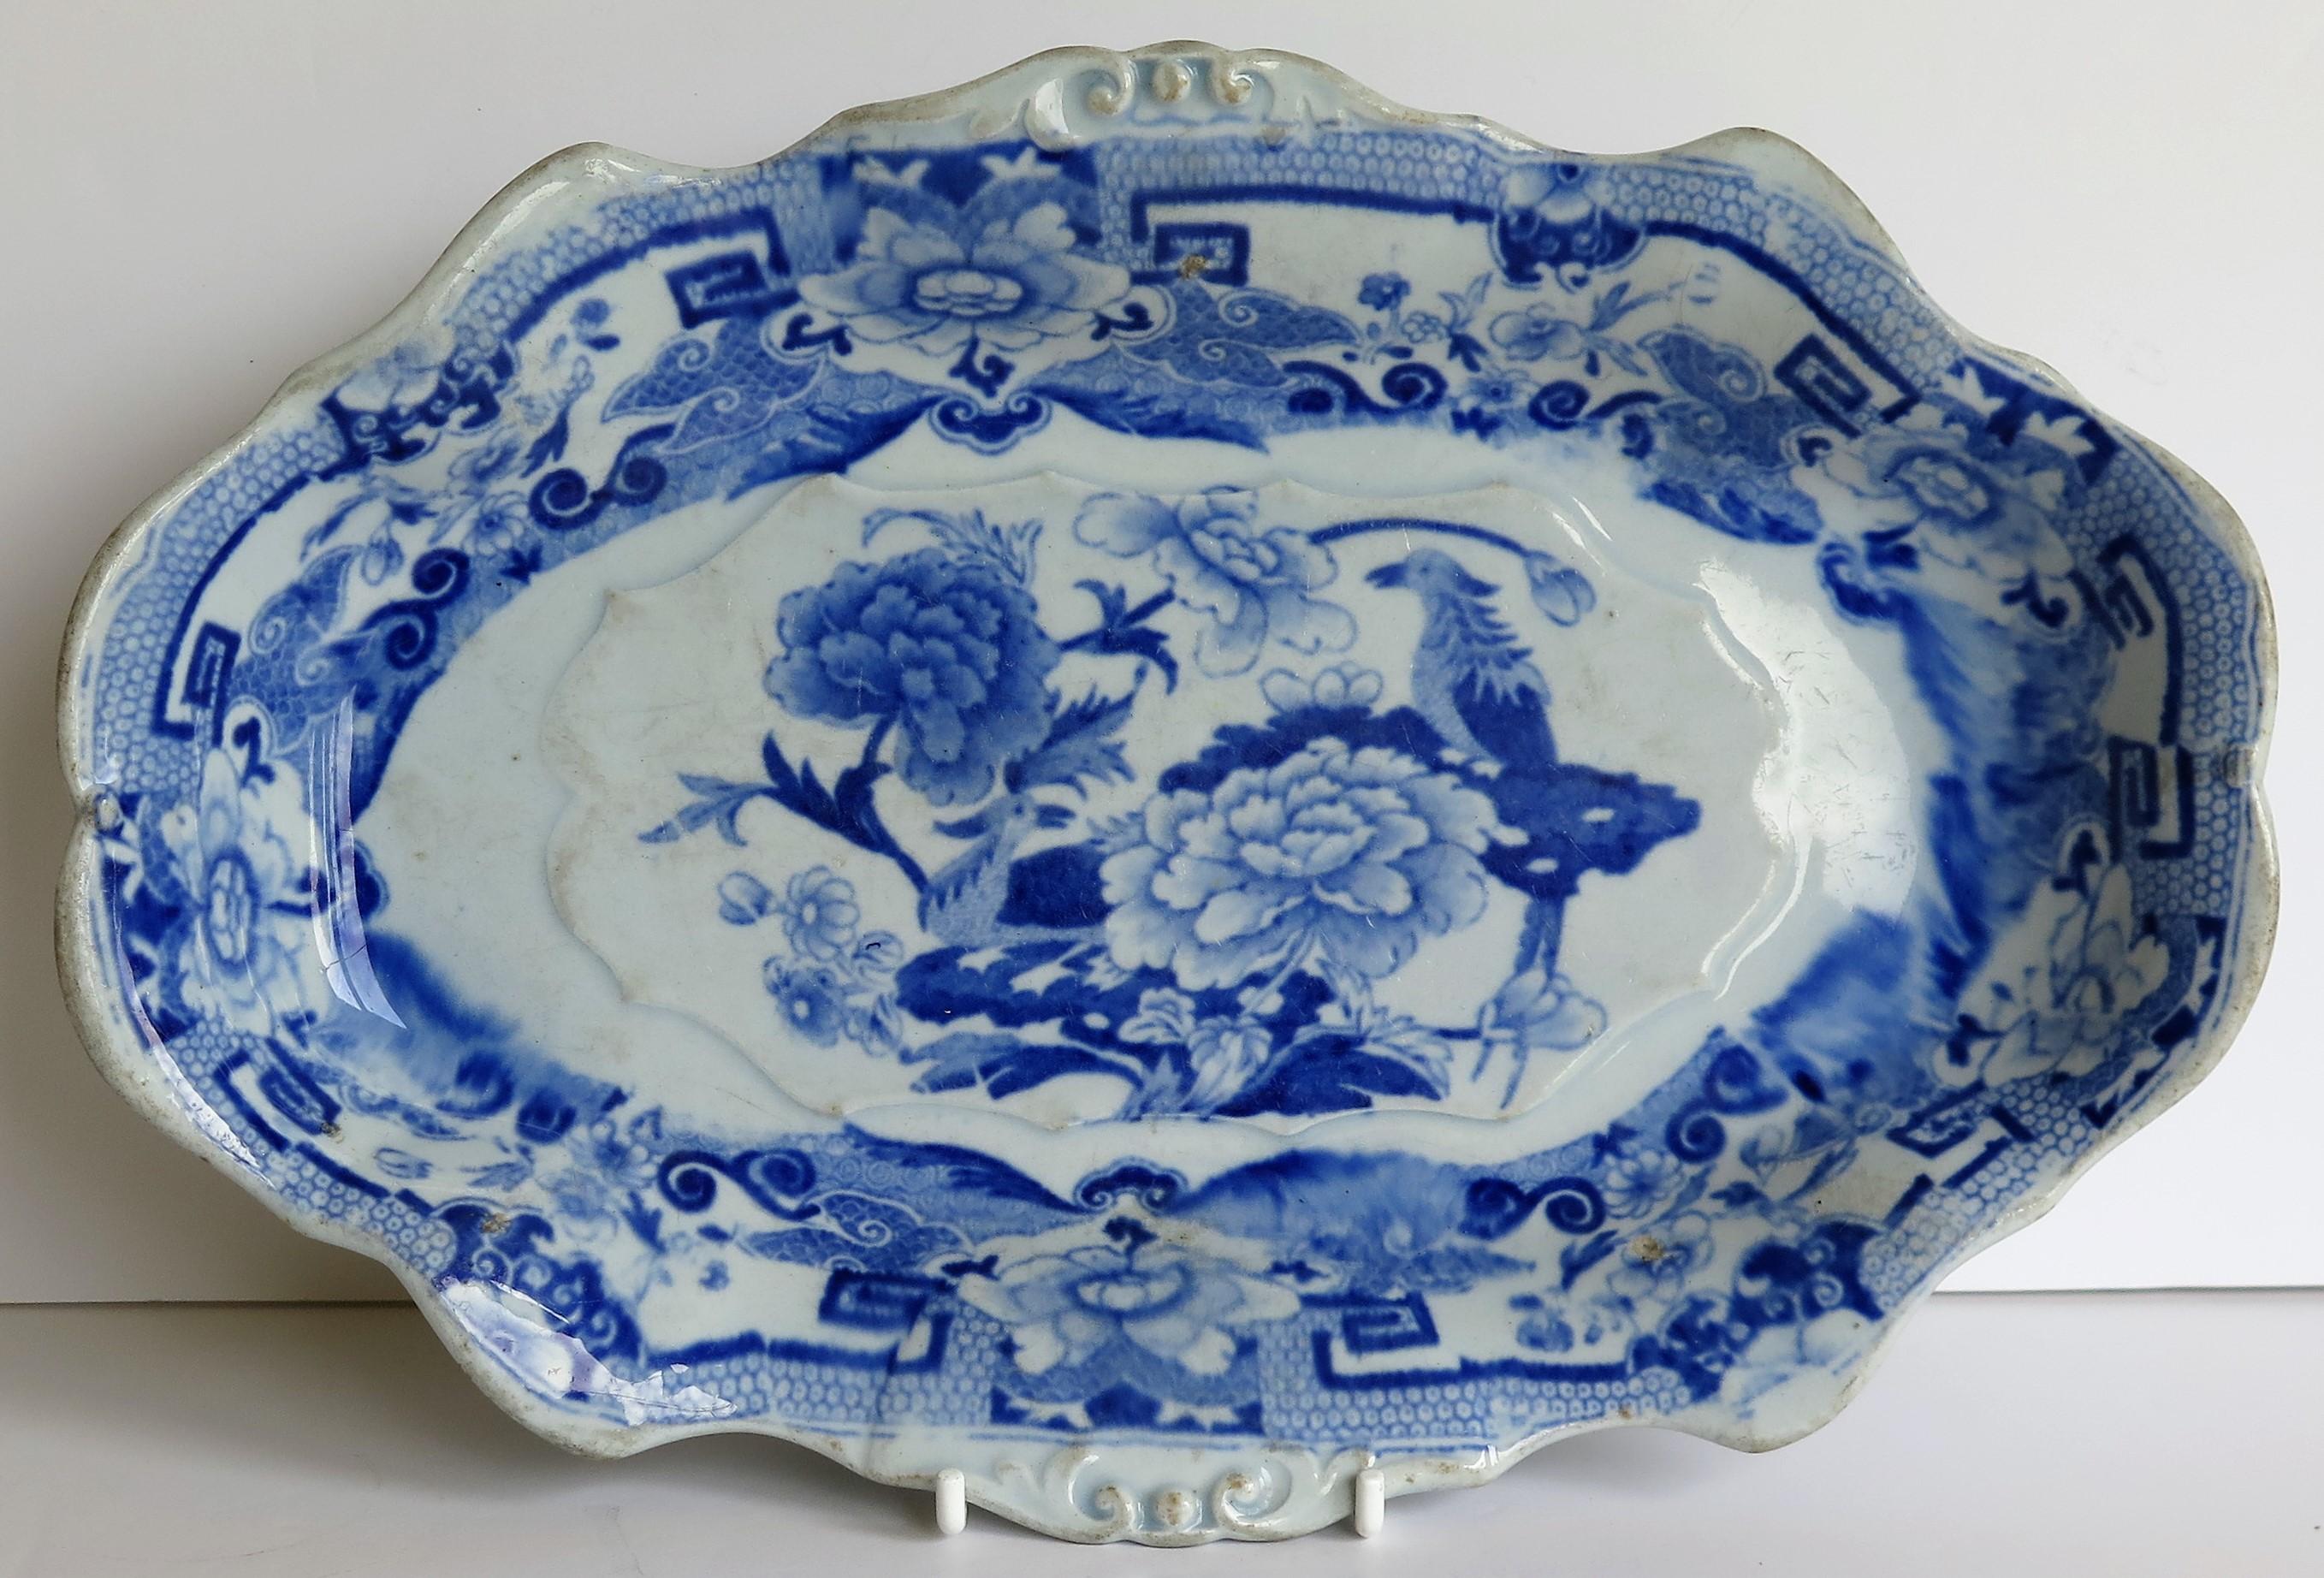 This is a very early Mason's ironstone desert or serving dish, circa 1815-1820.

The piece has nice scalloped edges and would originally have been part of a larger desert service.

The pattern is called 